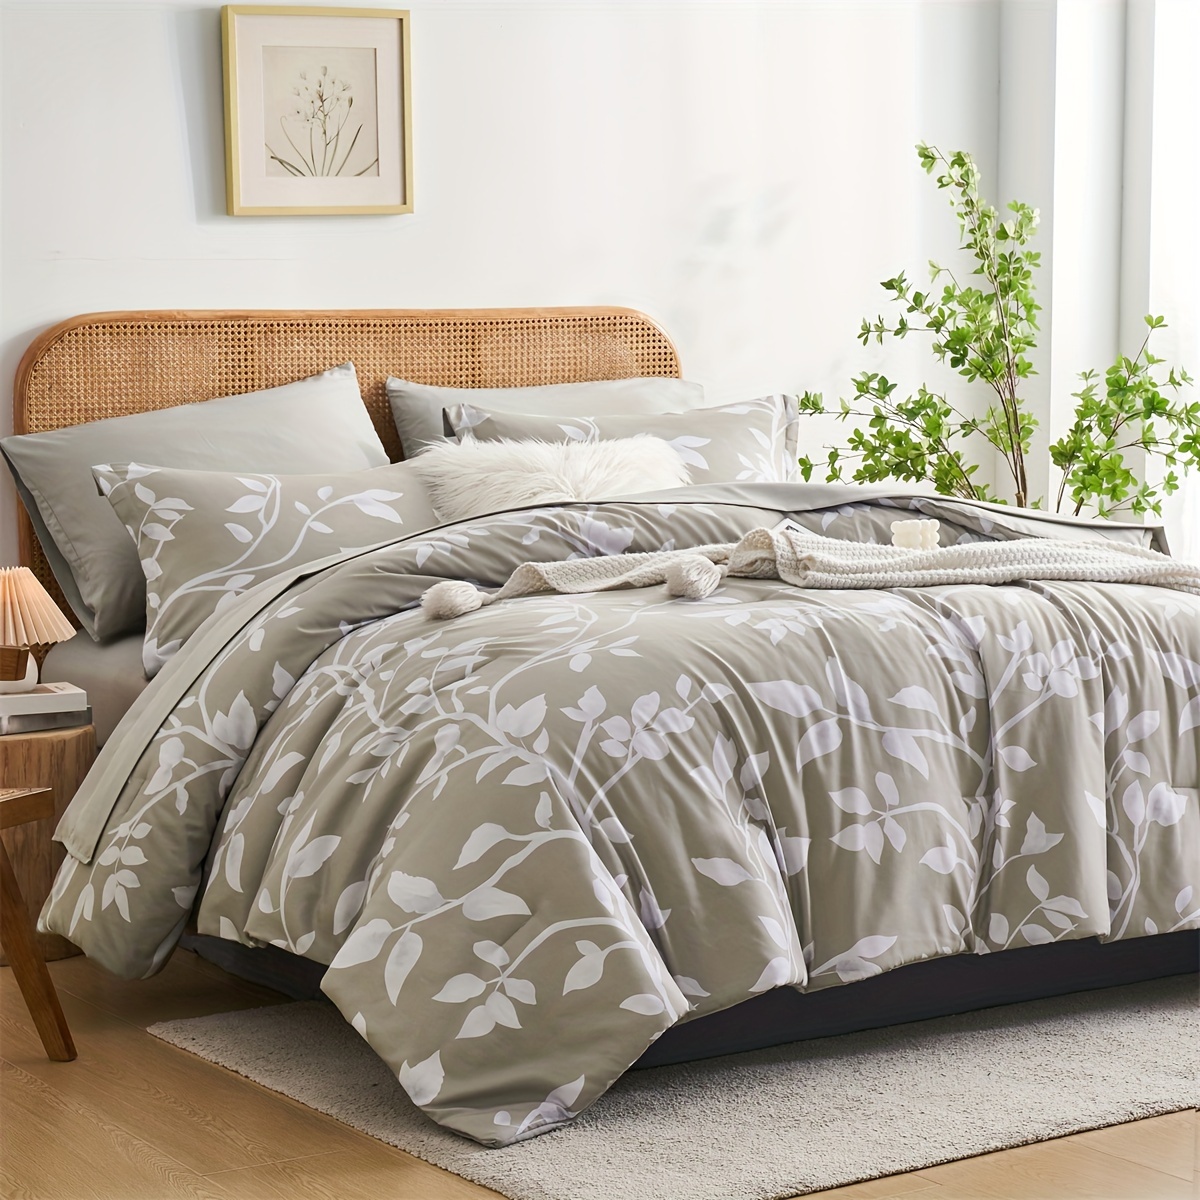 

7pcs Khaki Plant Branch Comforter Set (1*comforter + 1*flat Sheet + 1*fitted Sheet + 4*pillowcase Without Filler), Skin-friendly And Breathable Soft And Comfortable Bedding Set For Bedroom Room Decor